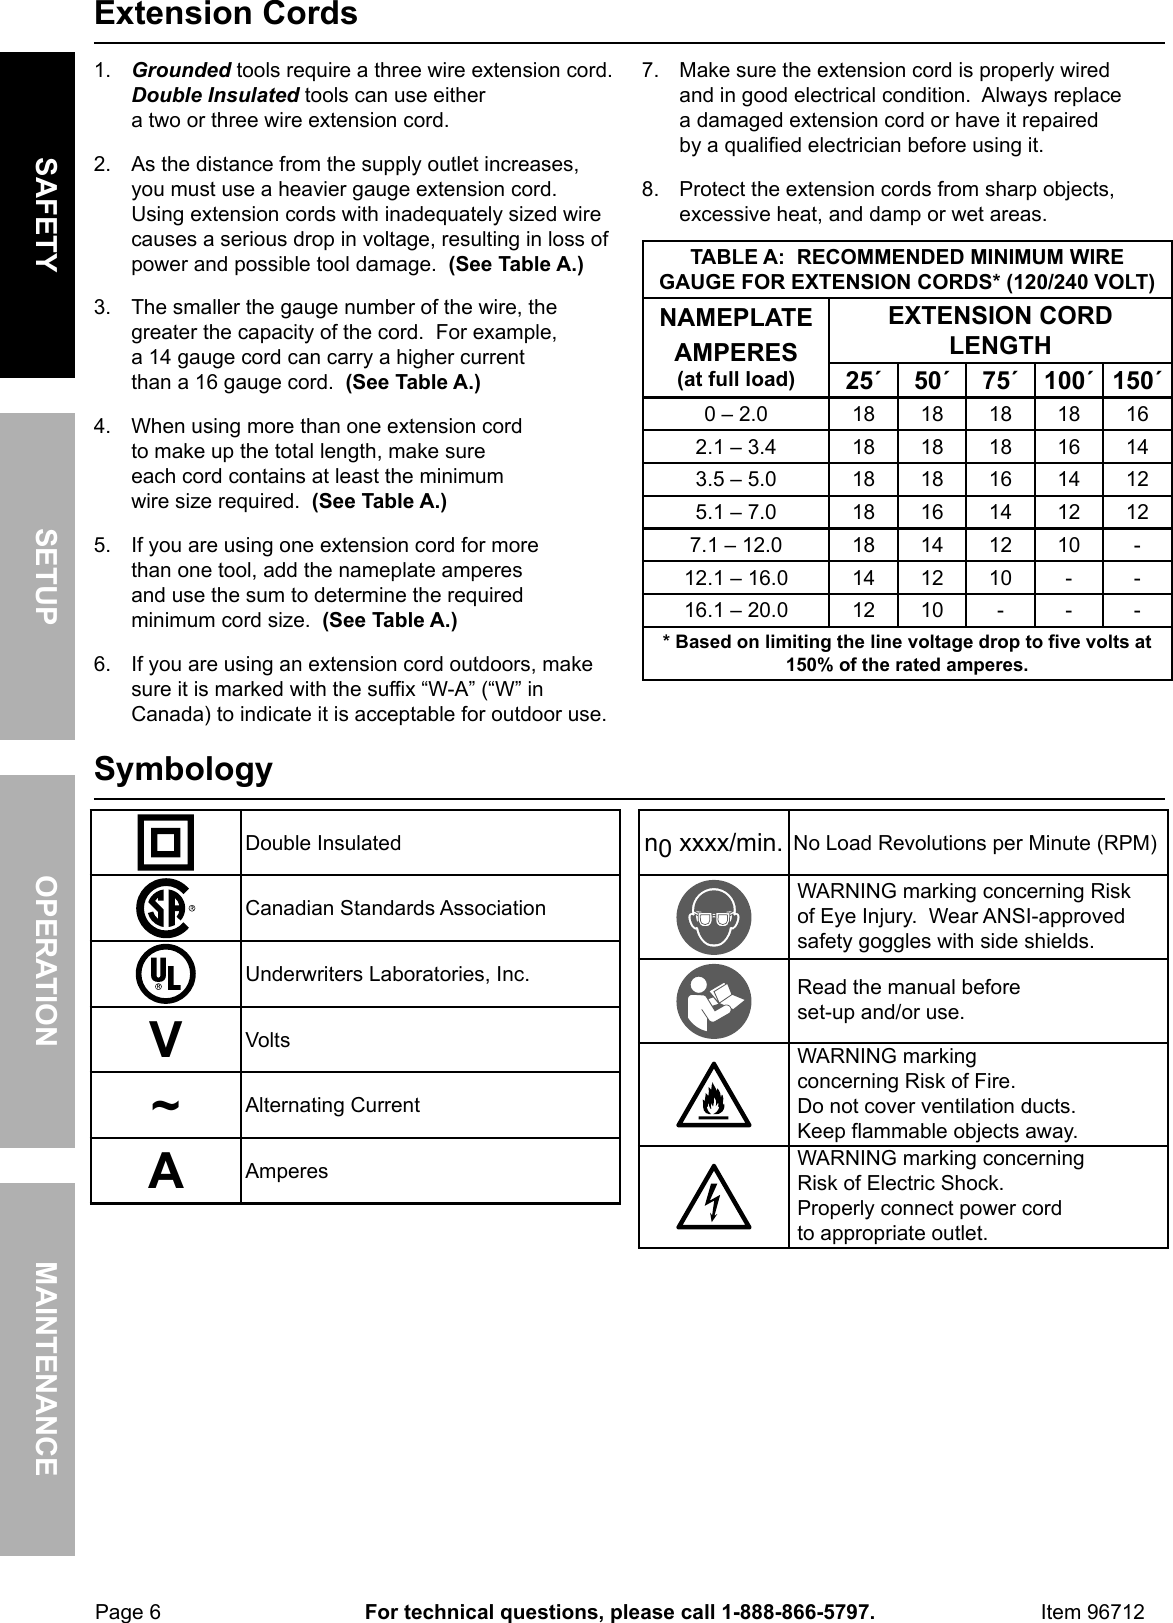 Page 6 of 12 - Harbor-Freight Harbor-Freight-1300-Watt-Plastic-Welding-Kit-With-Air-Motor-And-Temperature-Adjustment-Product-Manual-  Harbor-freight-1300-watt-plastic-welding-kit-with-air-motor-and-temperature-adjustment-product-manual